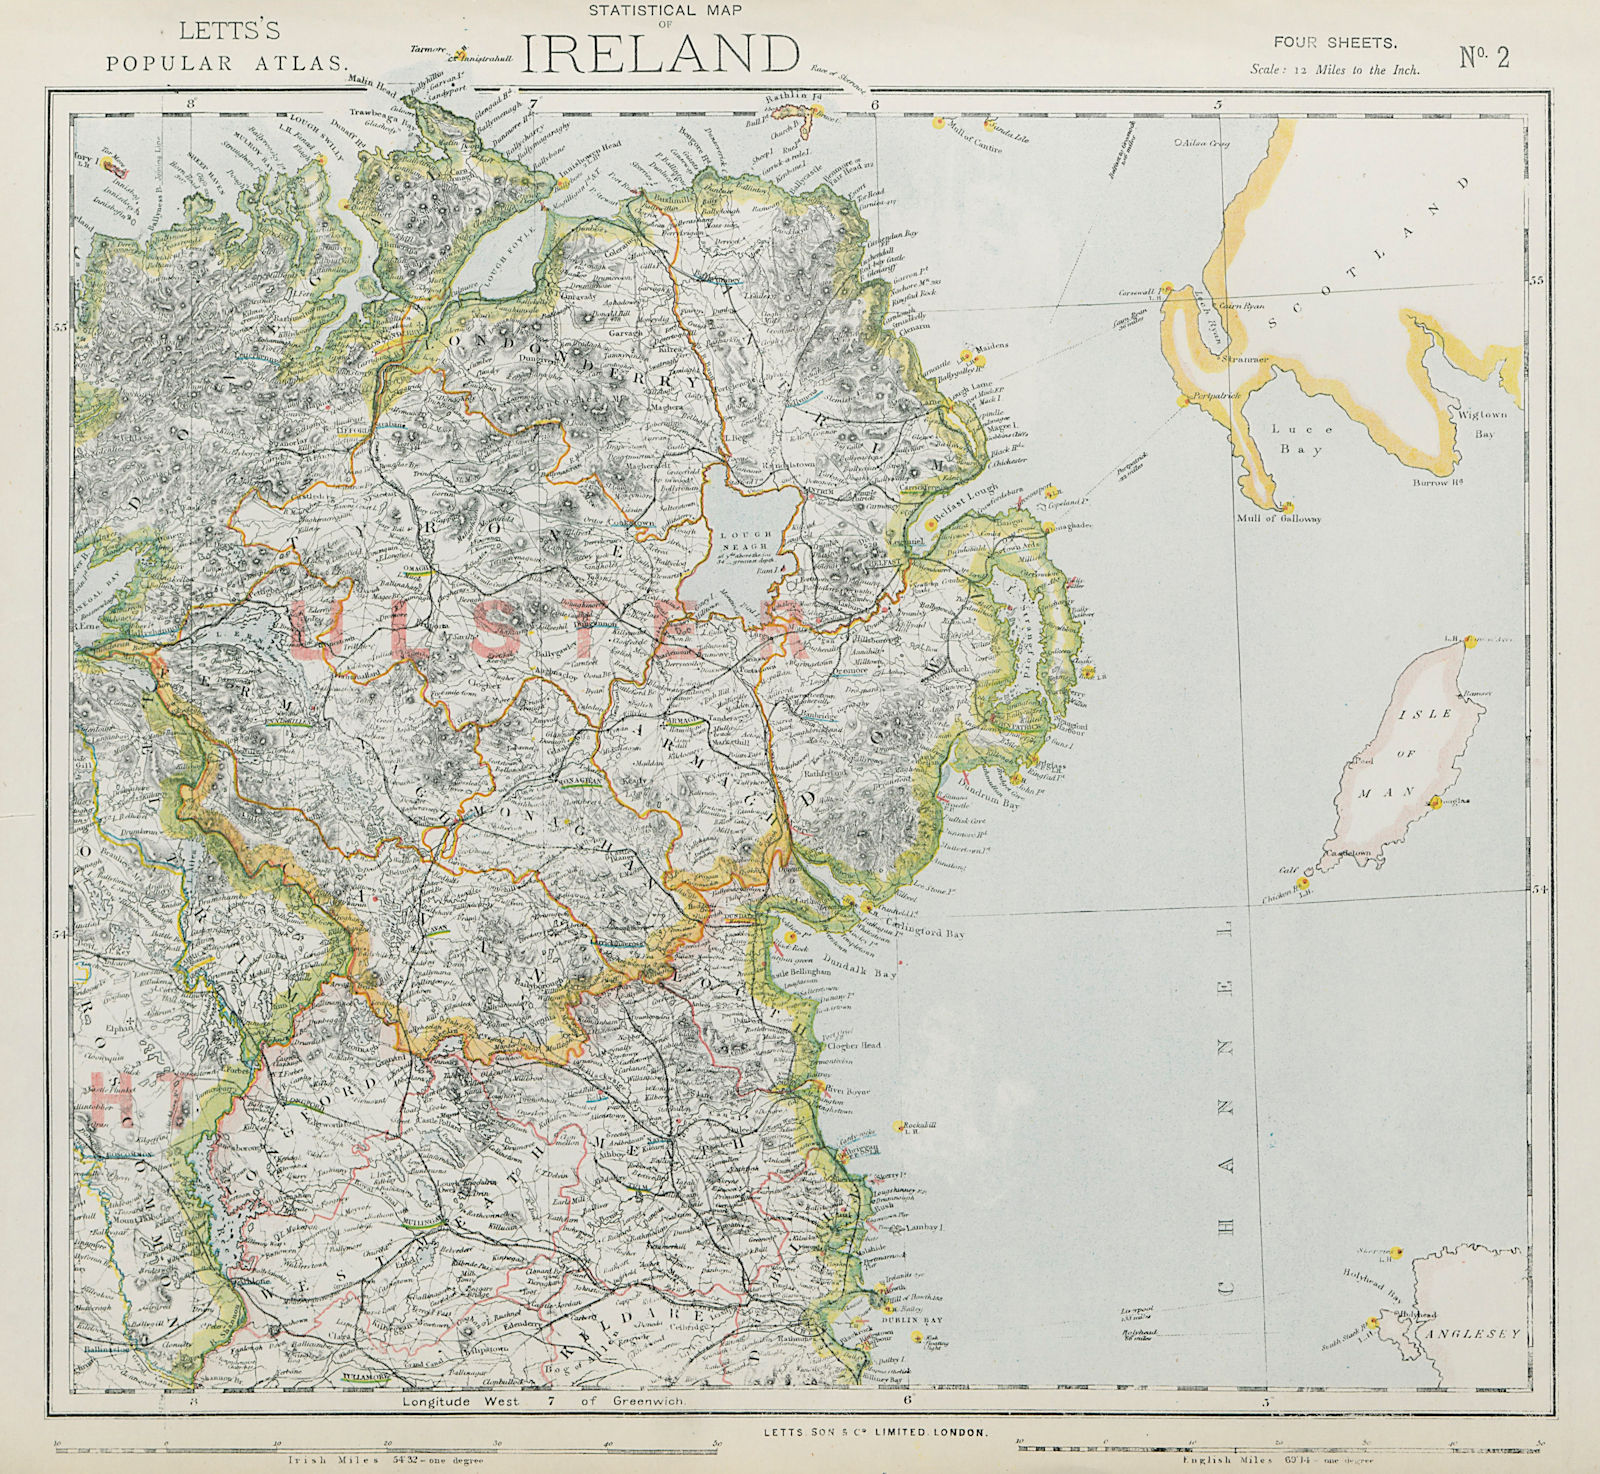 NE NORTHERN IRELAND. Lighthouses. Lifeboat stations. Ulster. LETTS 1884 map